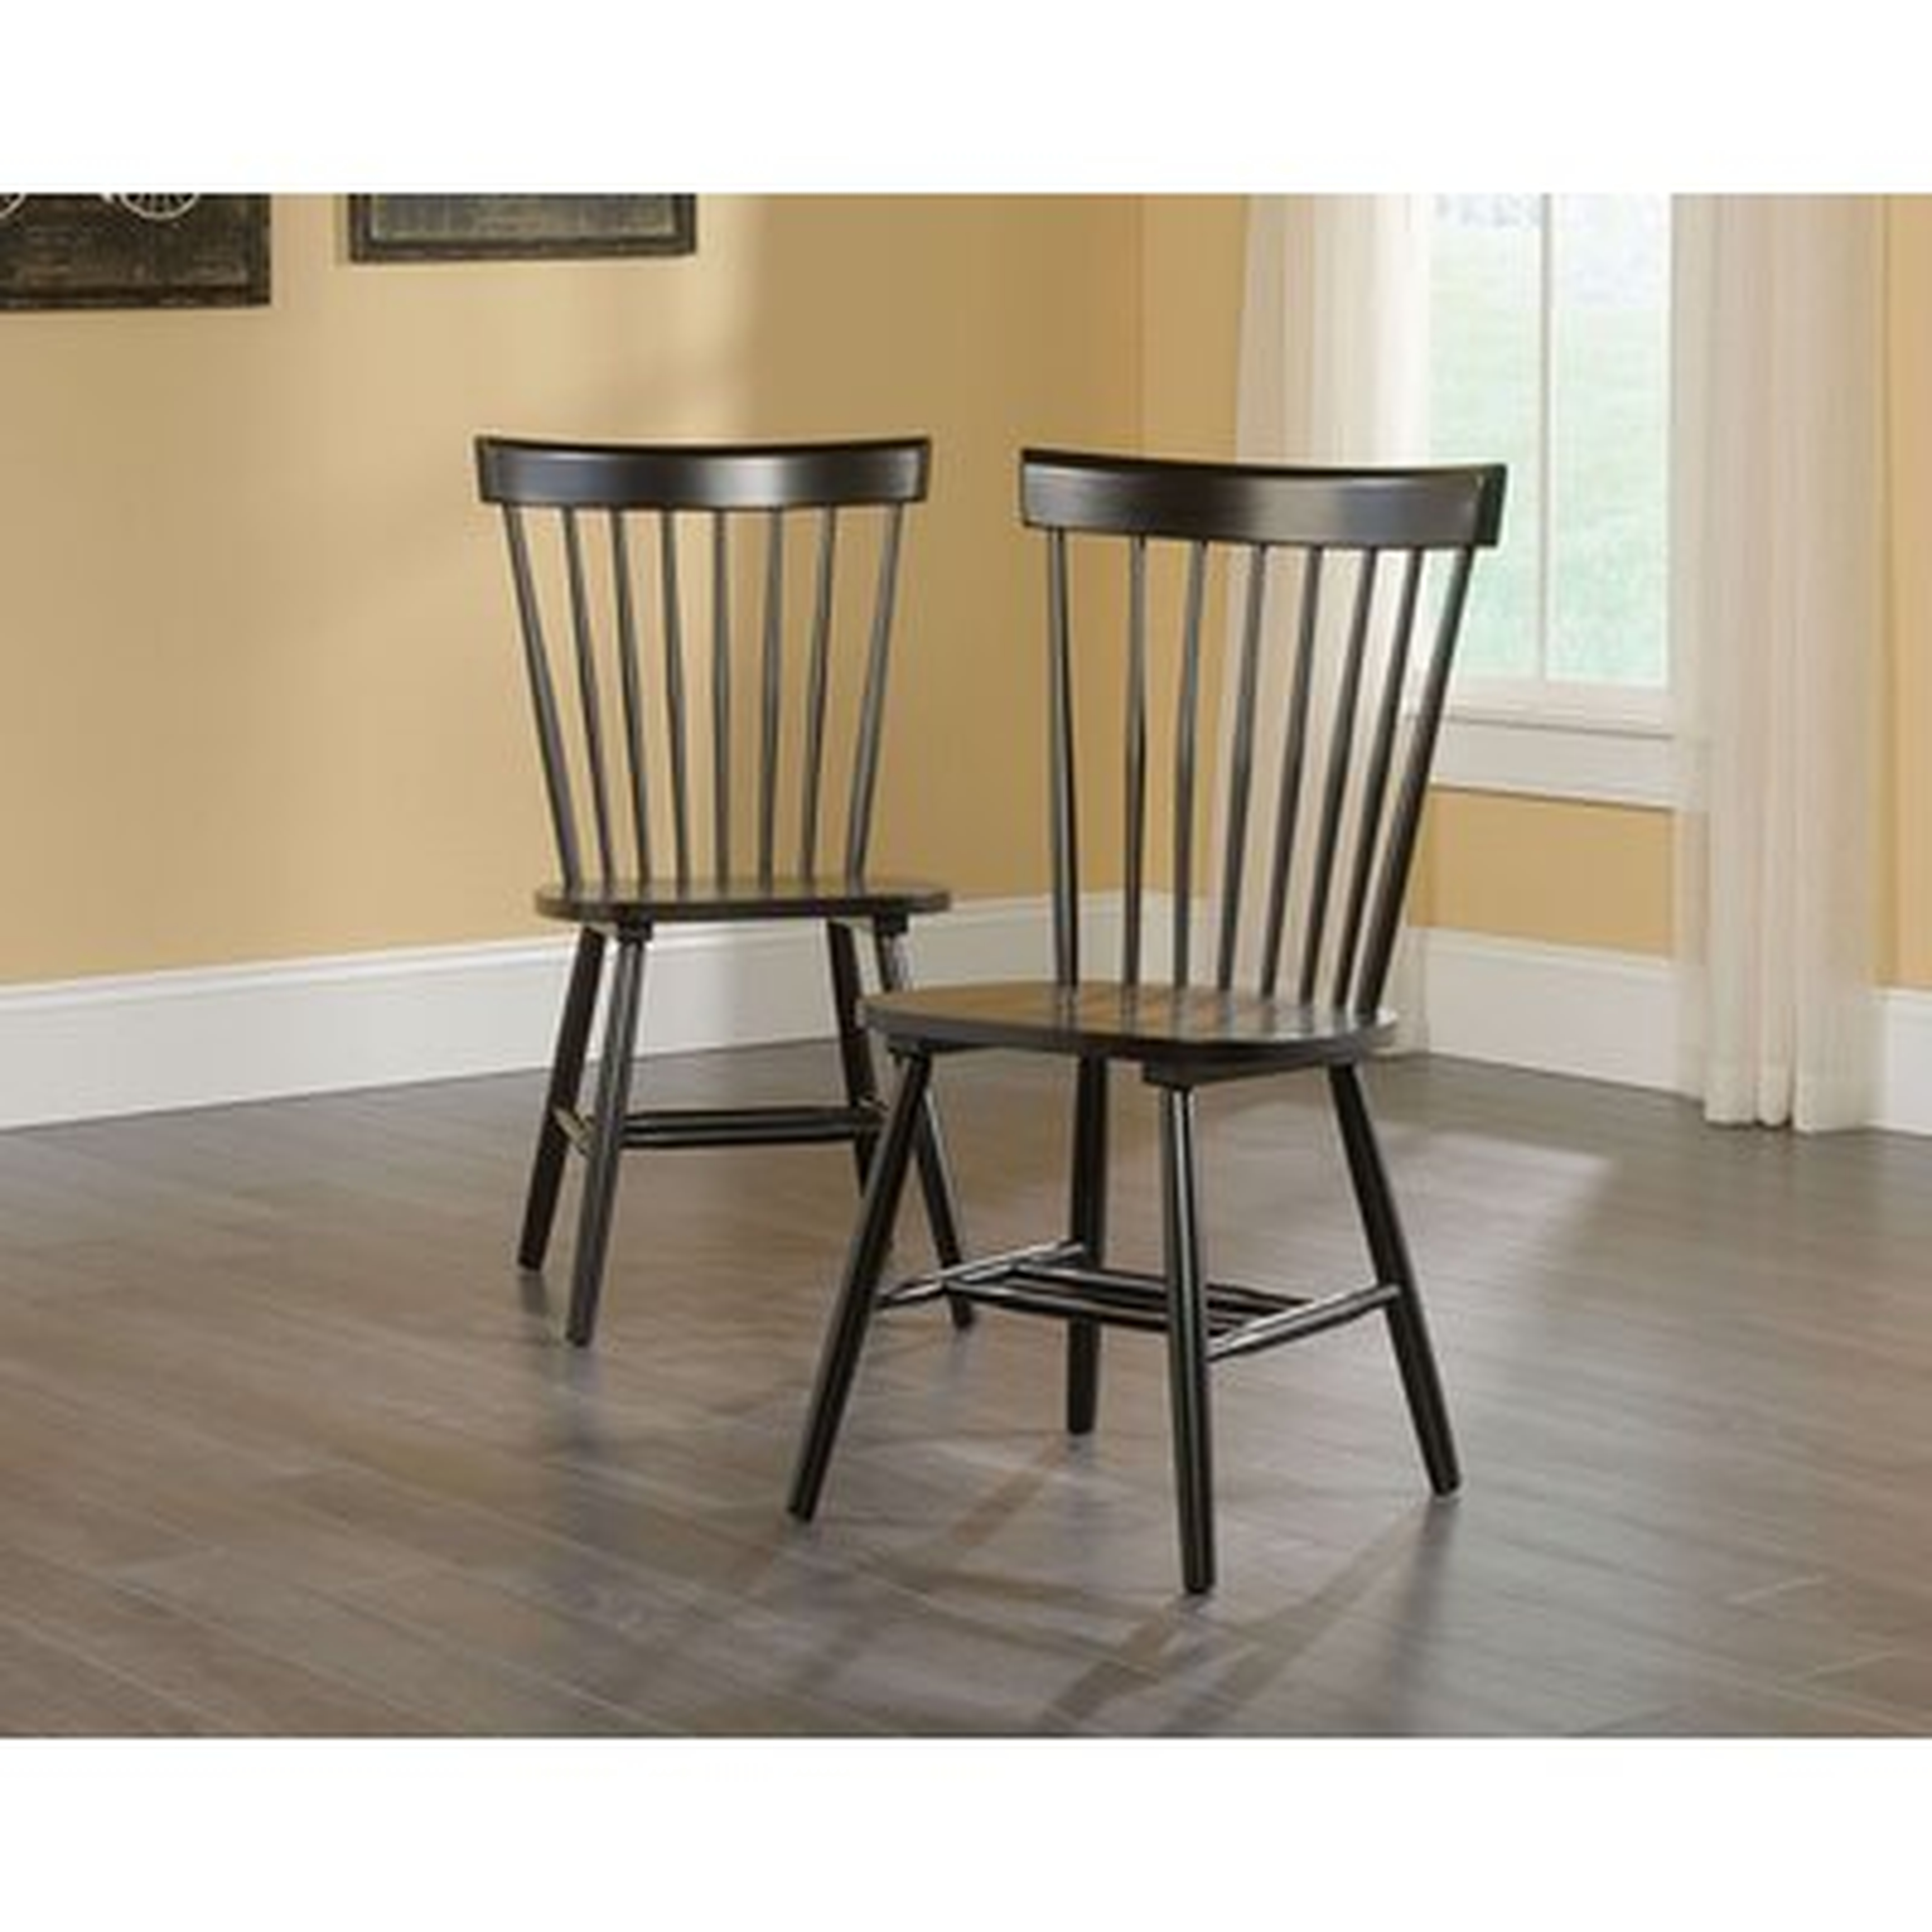 Modern Farmhouse Spindle Chairs In Black set of 2 - Wayfair